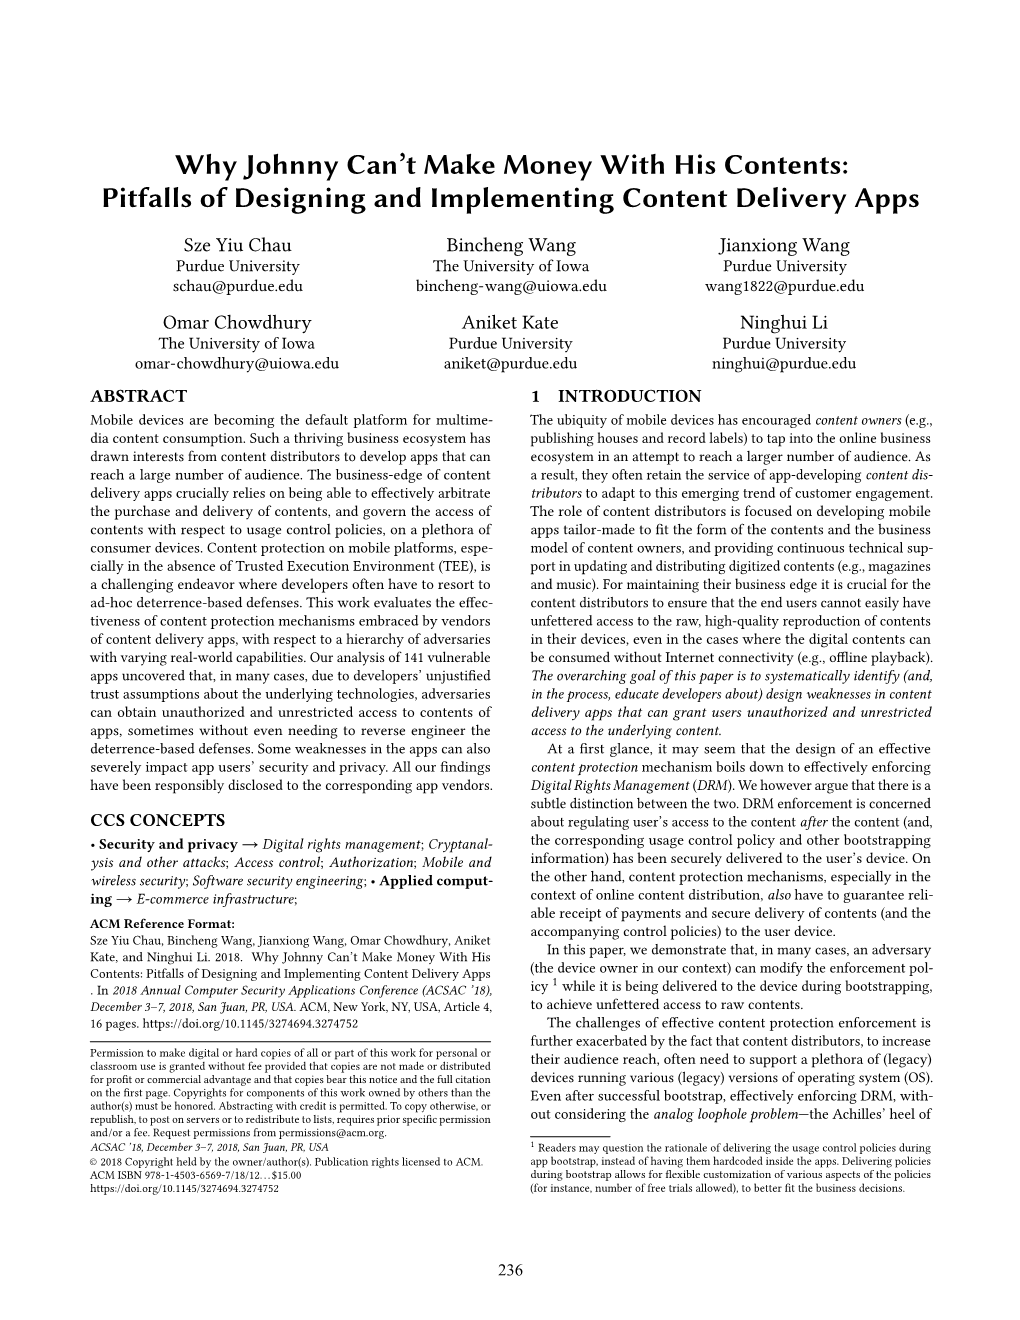 Pitfalls of Designing and Implementing Content Delivery Apps